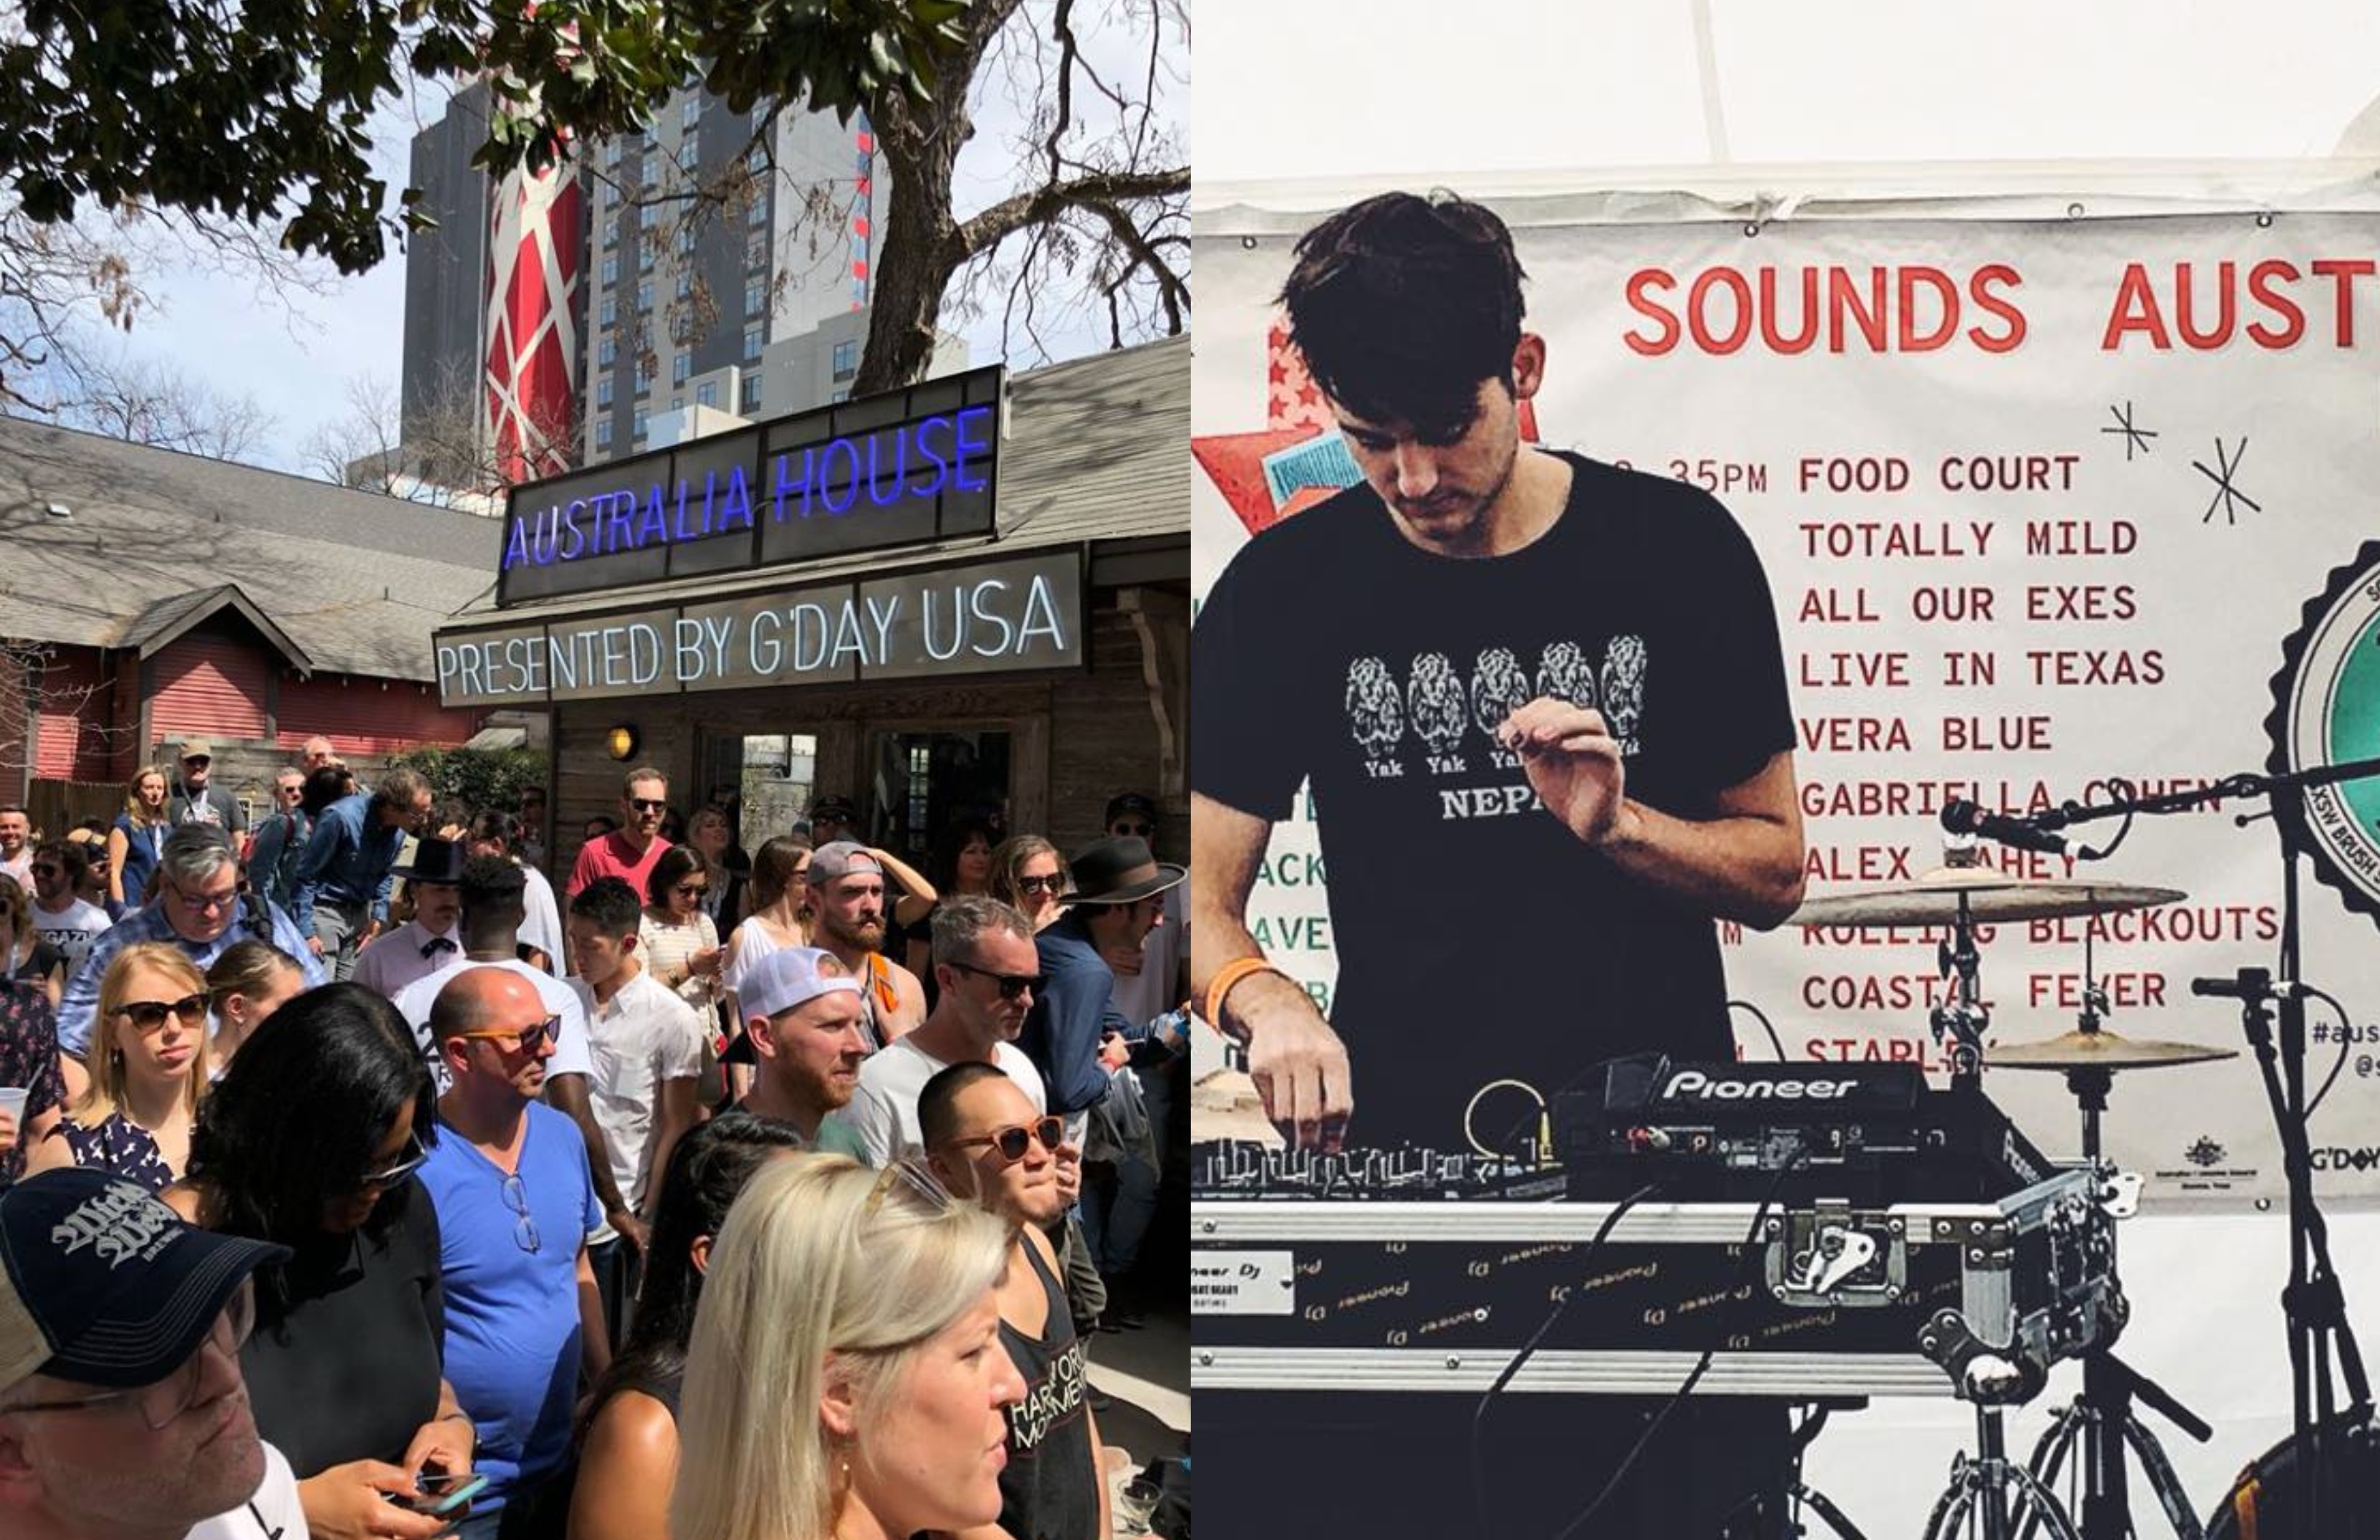 Australia House to return to SXSW for a second year